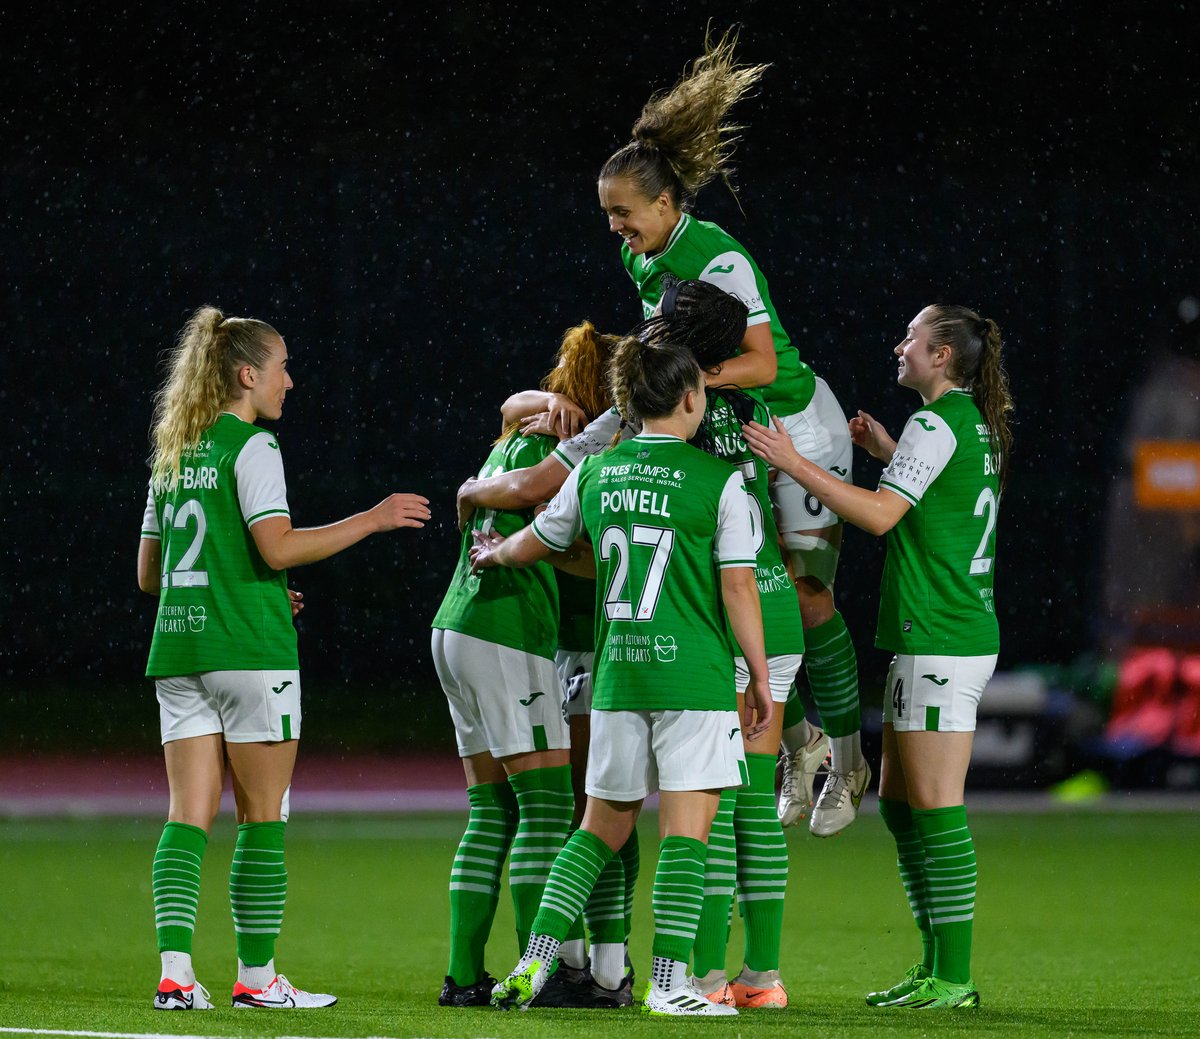 Ellis Notley reveals what factor may give Hibs an advantage in the Sky Sports Cup semi-final